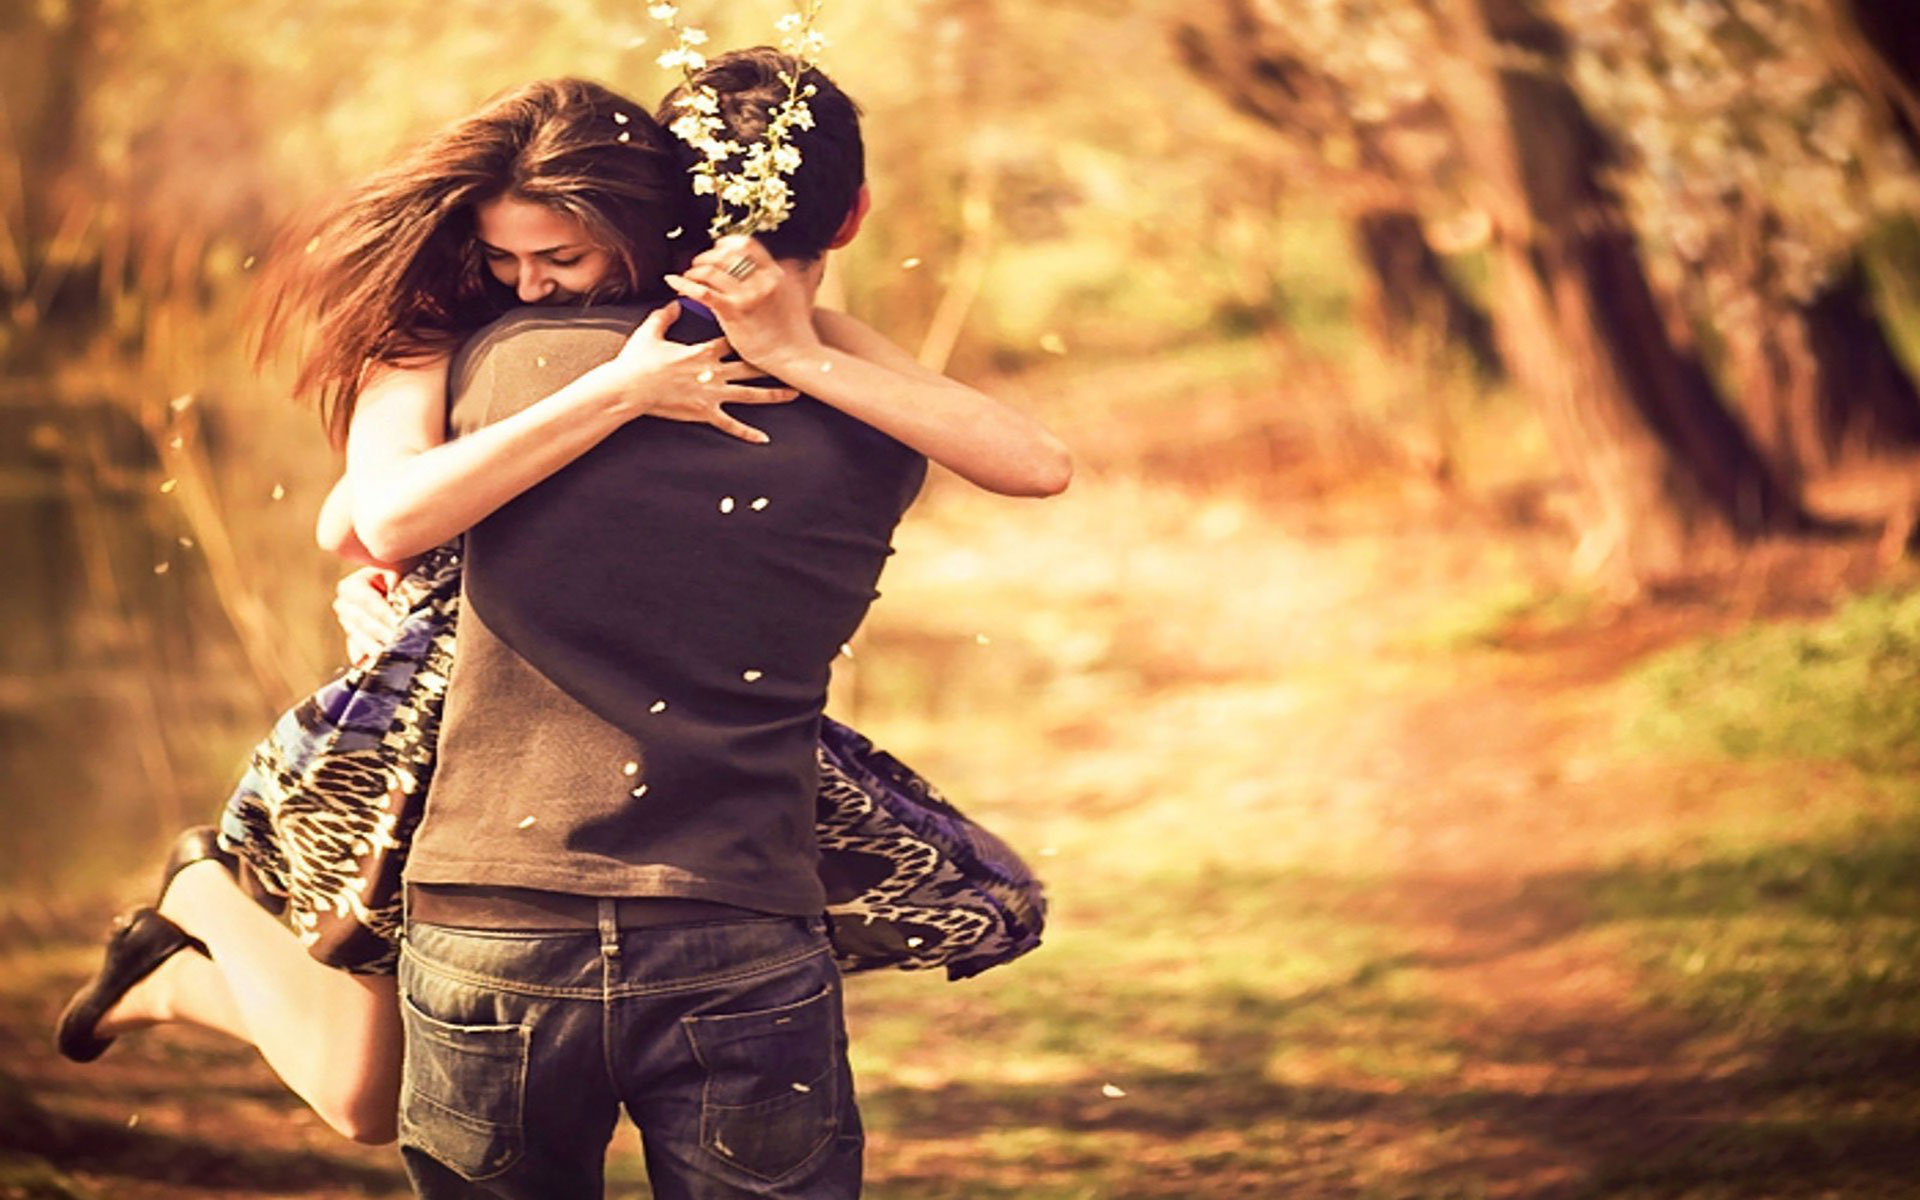 Cute Couple Hug Wallpaper Pictures Of Lovers Hugging